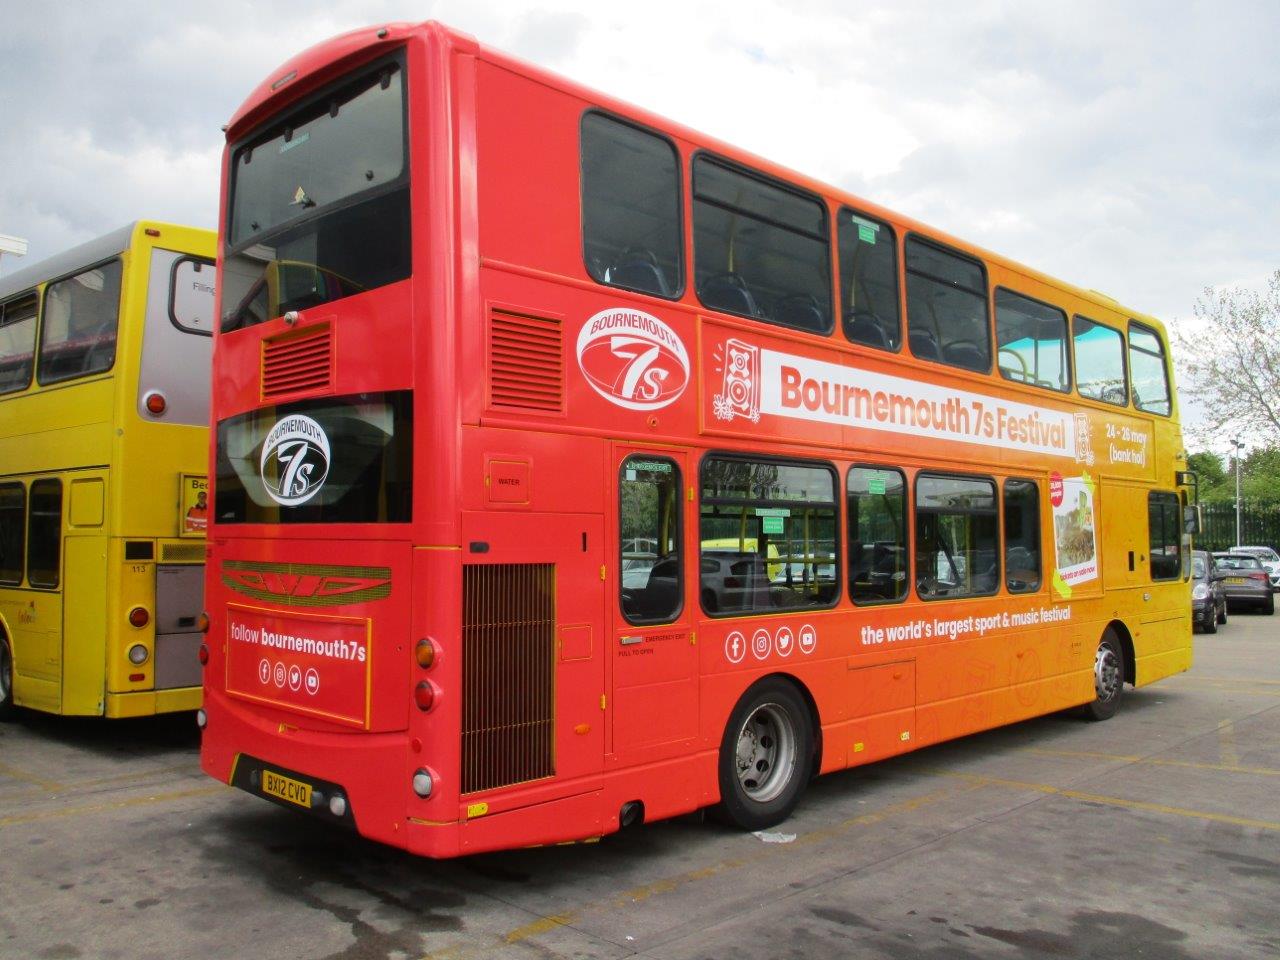 Yellow Buses delivers Bournemouth 7s festival shuttle service